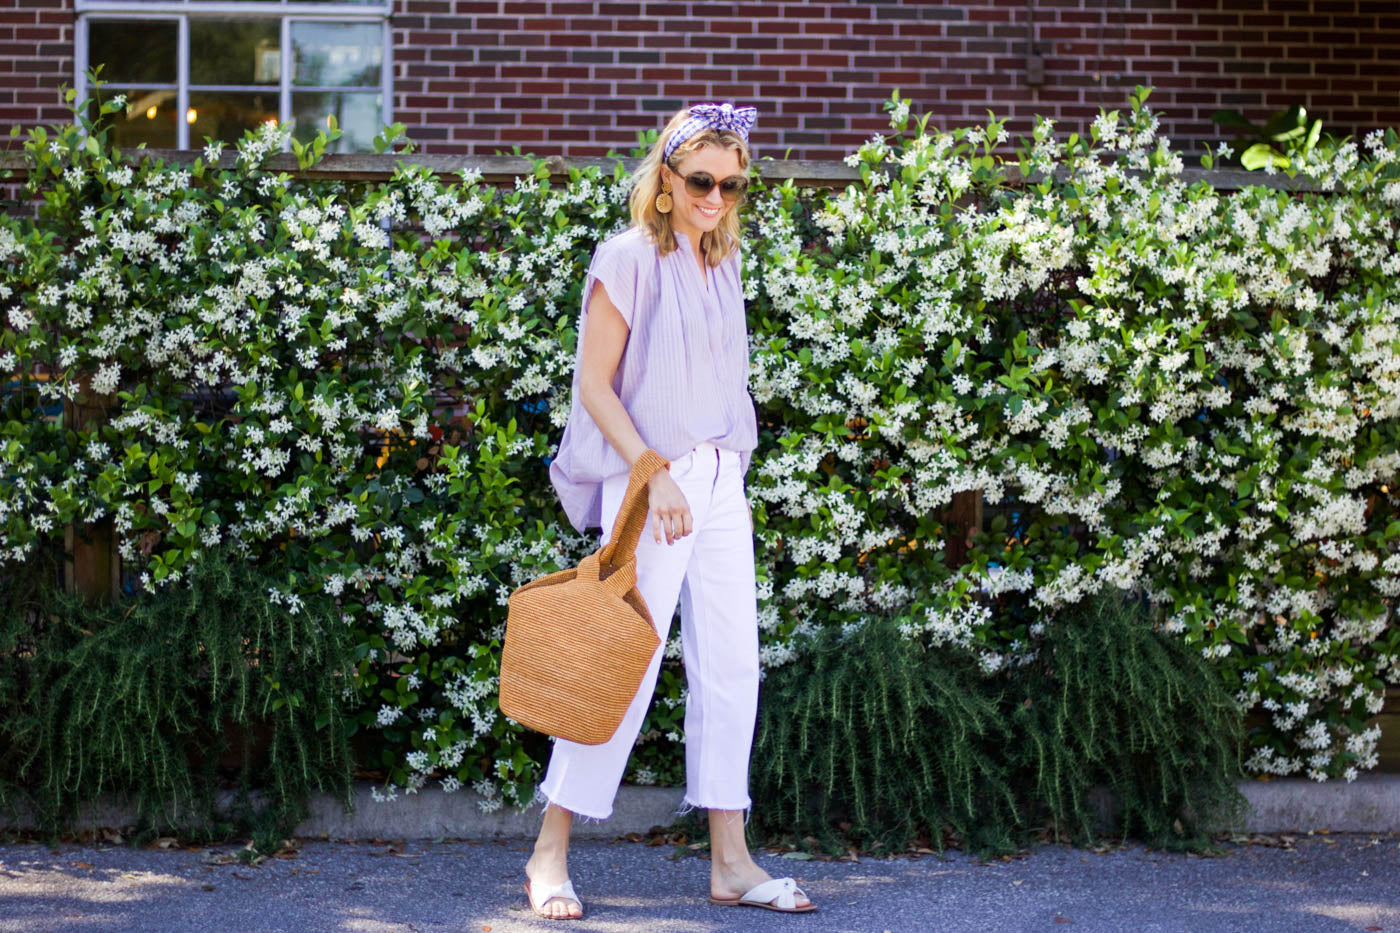 Staying On Trend in our Lilac Tunic + Sporty-Chic Sandals